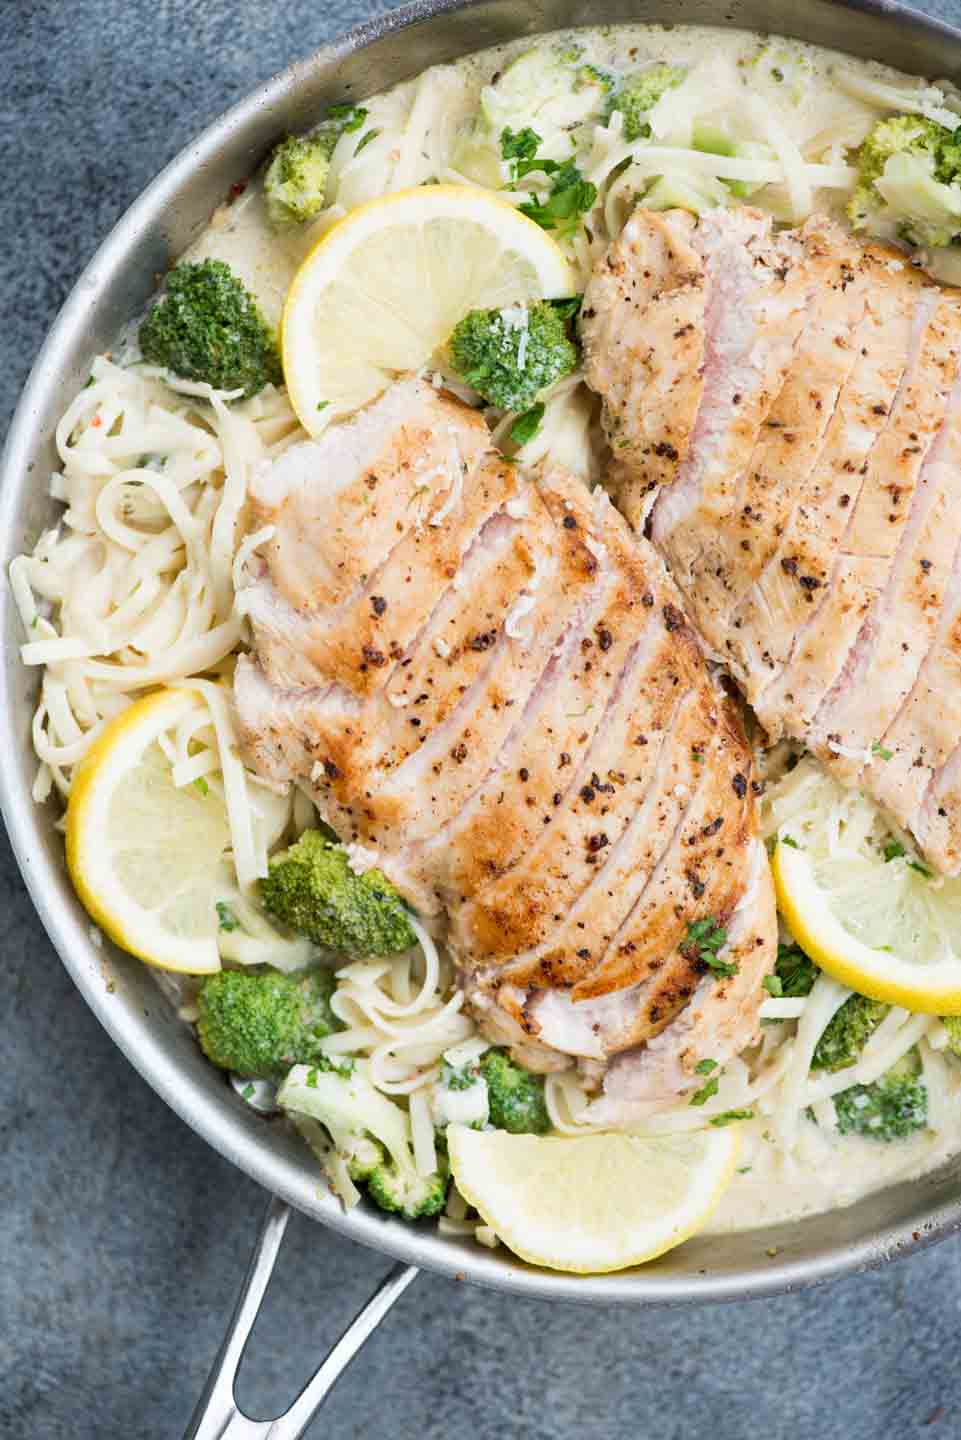 Chicken Broccoli Pasta with incredibly creamy lemon parmesan sauce is light and refreshing. A filling dinner ready in just 30 minutes.